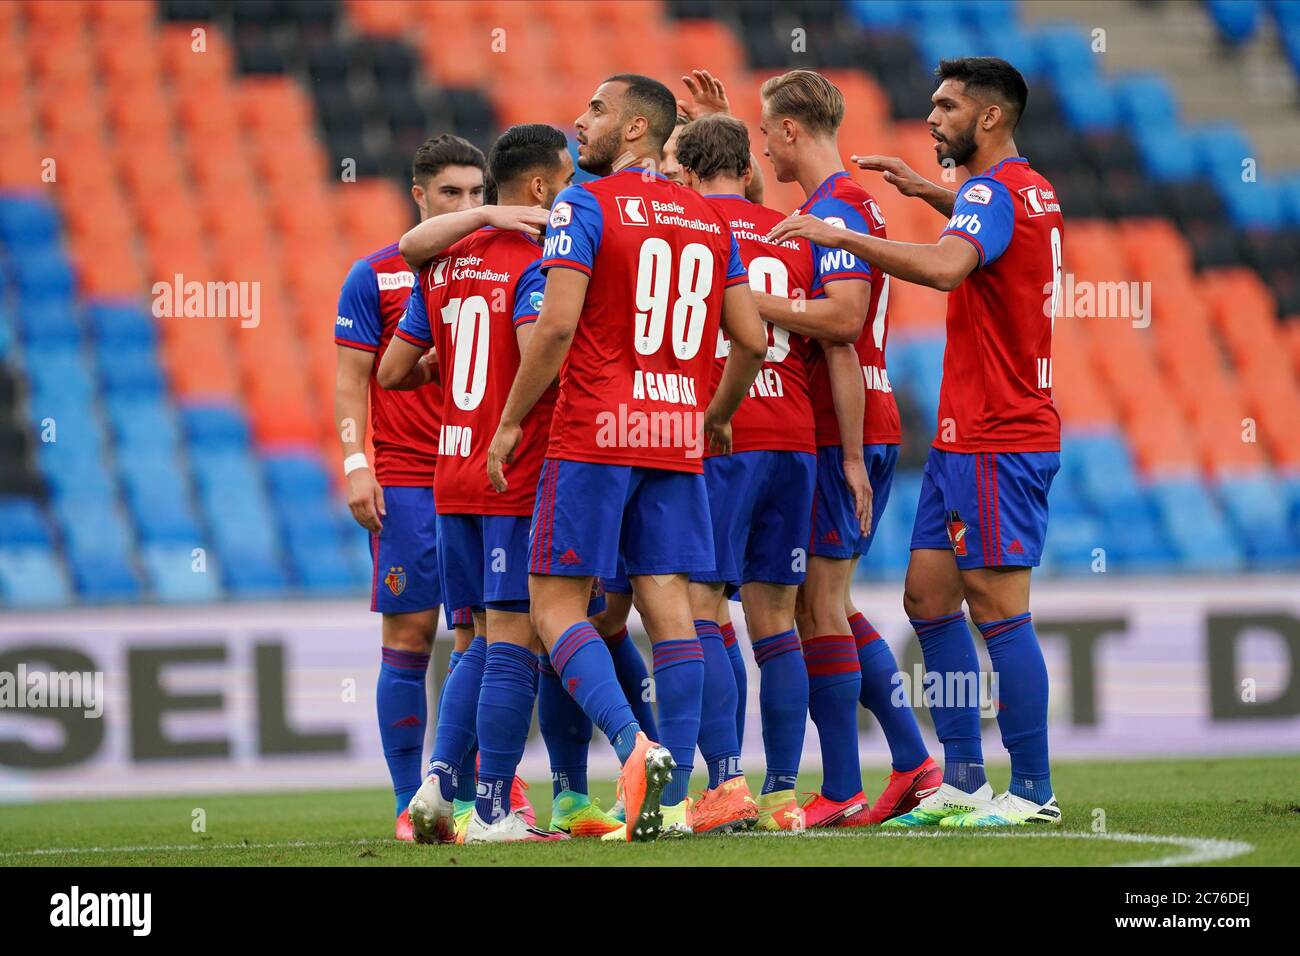 Players of FC Basel celebrate Fabian Freis goal during the Super League football match between FC Basel 1893 and FC Zuerich